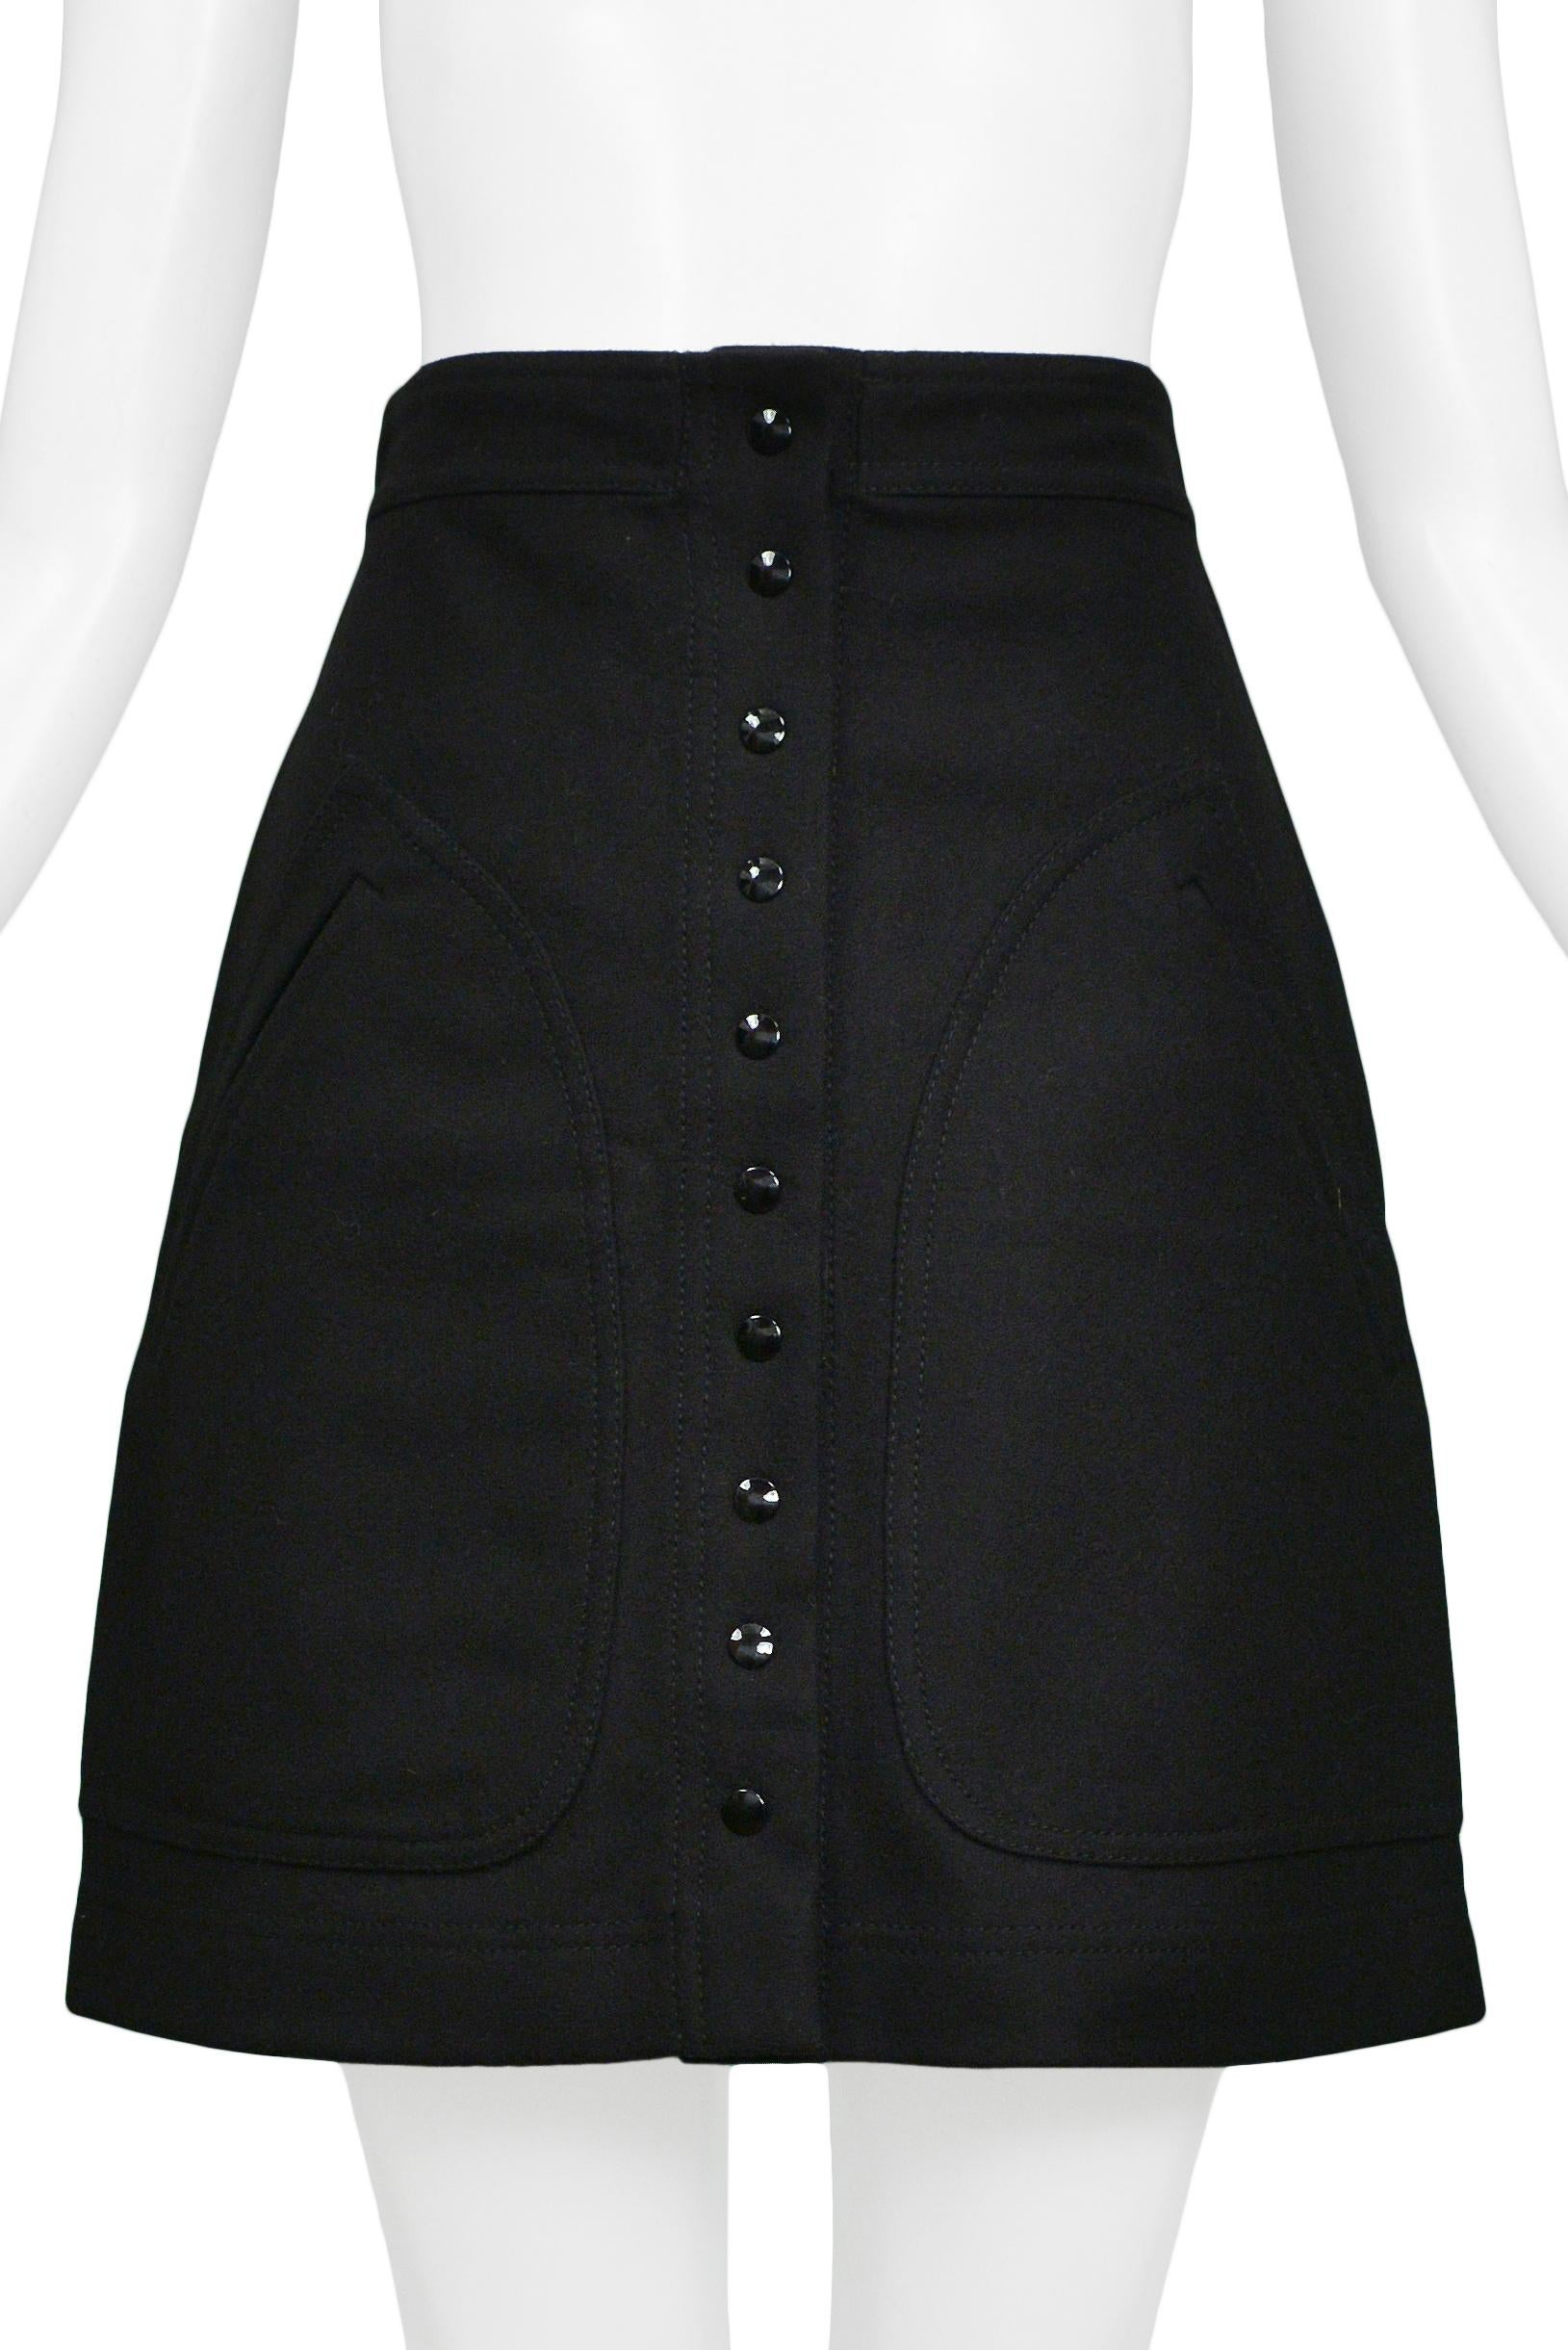 Balenciaga By Ghesquere Classic Black A-Line Mini Skirt 2003 In Excellent Condition For Sale In Los Angeles, CA